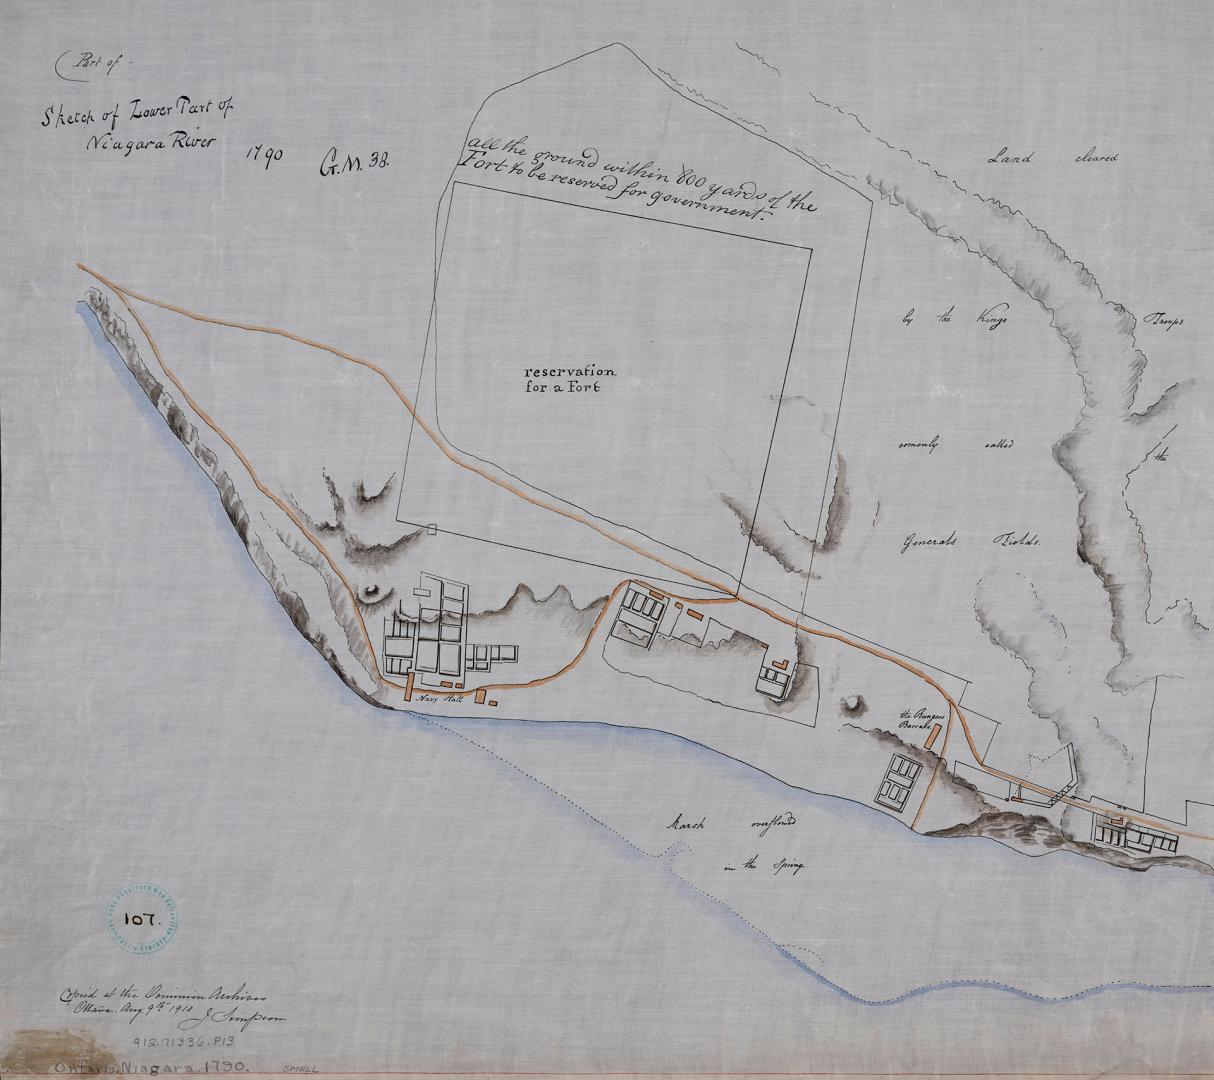 Part of sketch of lower part of Niagara River, 1790 G.M. 38